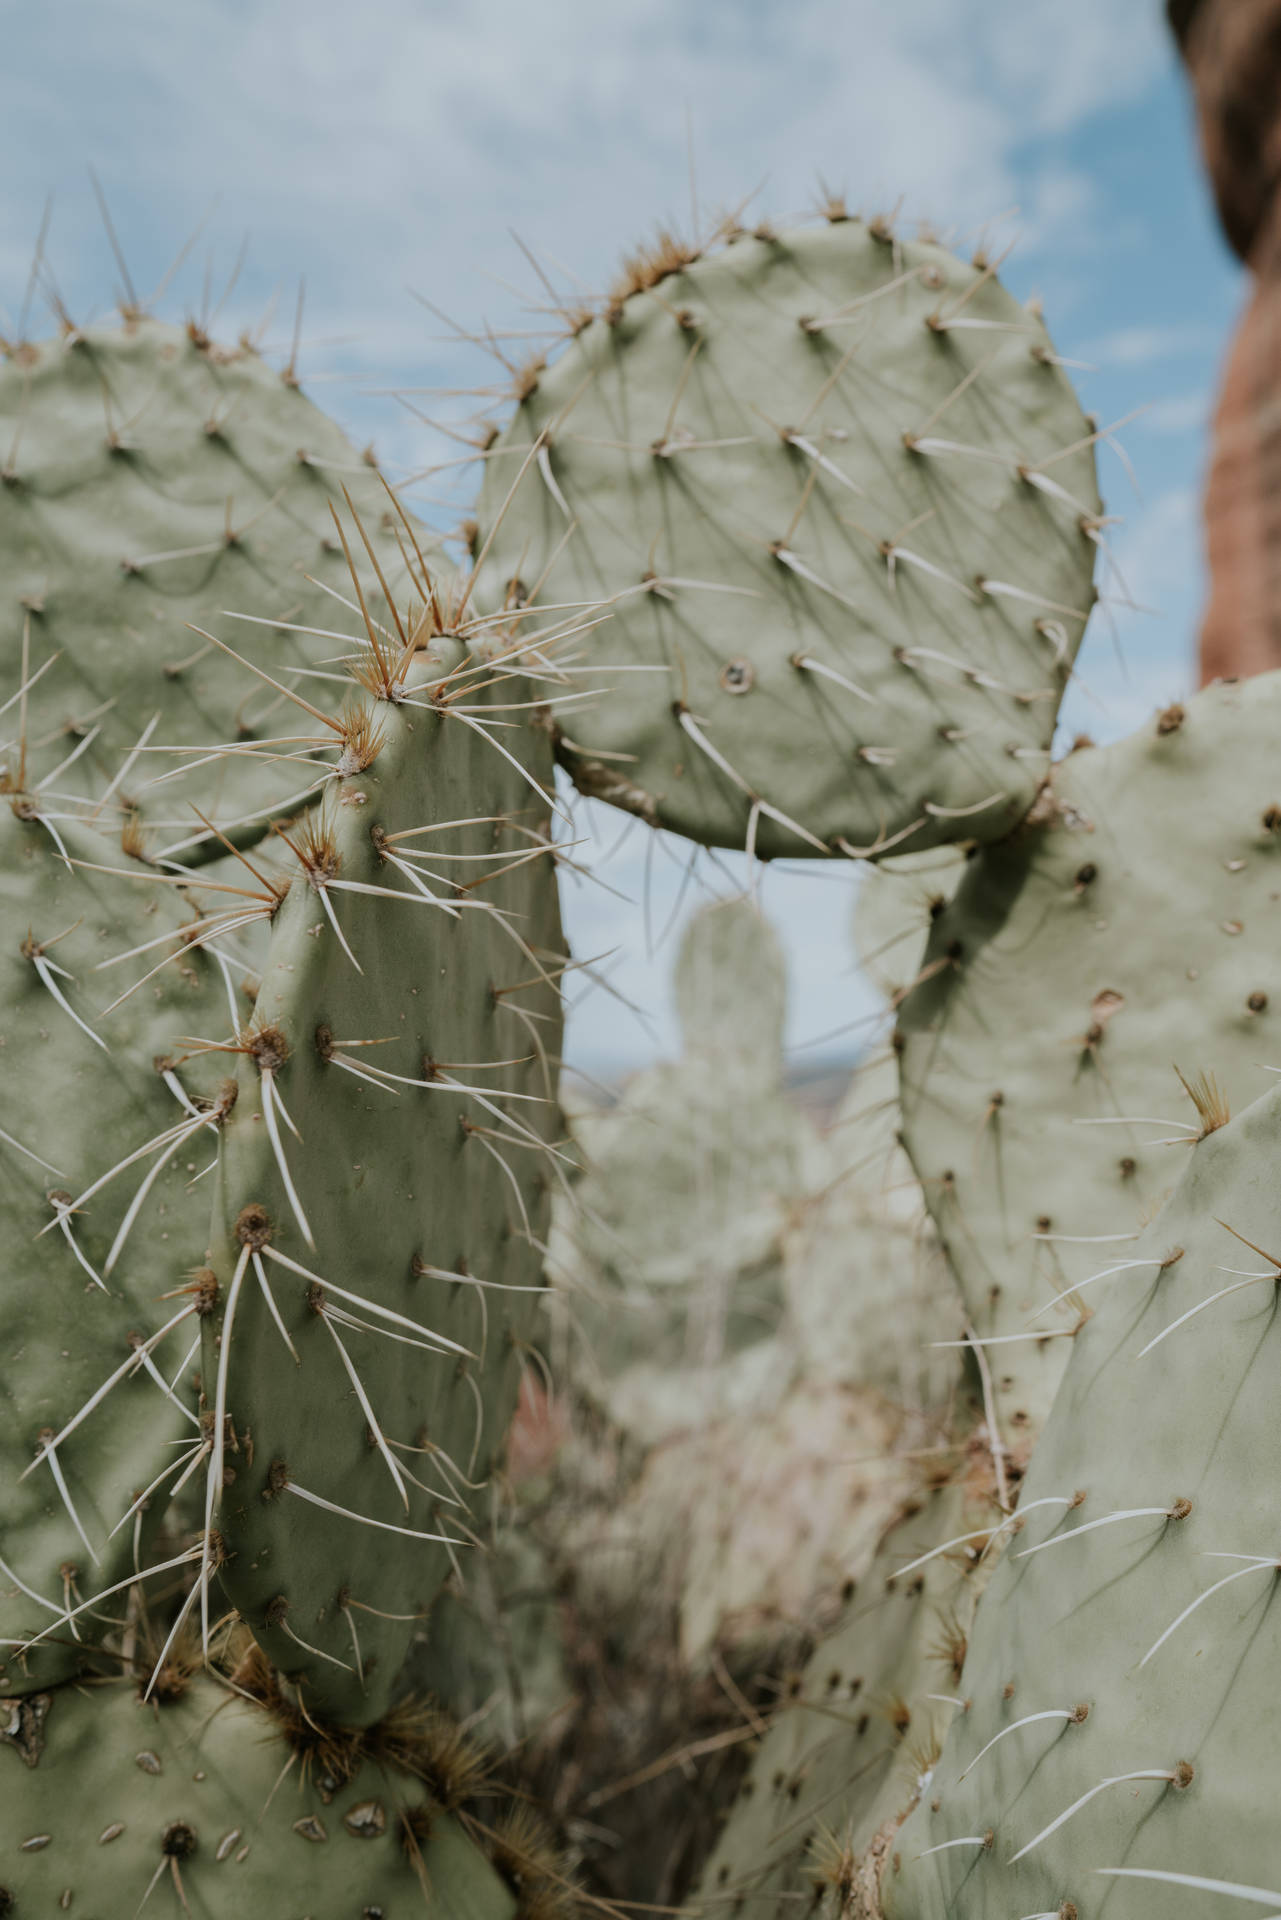 5304X7952 Cactus Wallpaper and Background